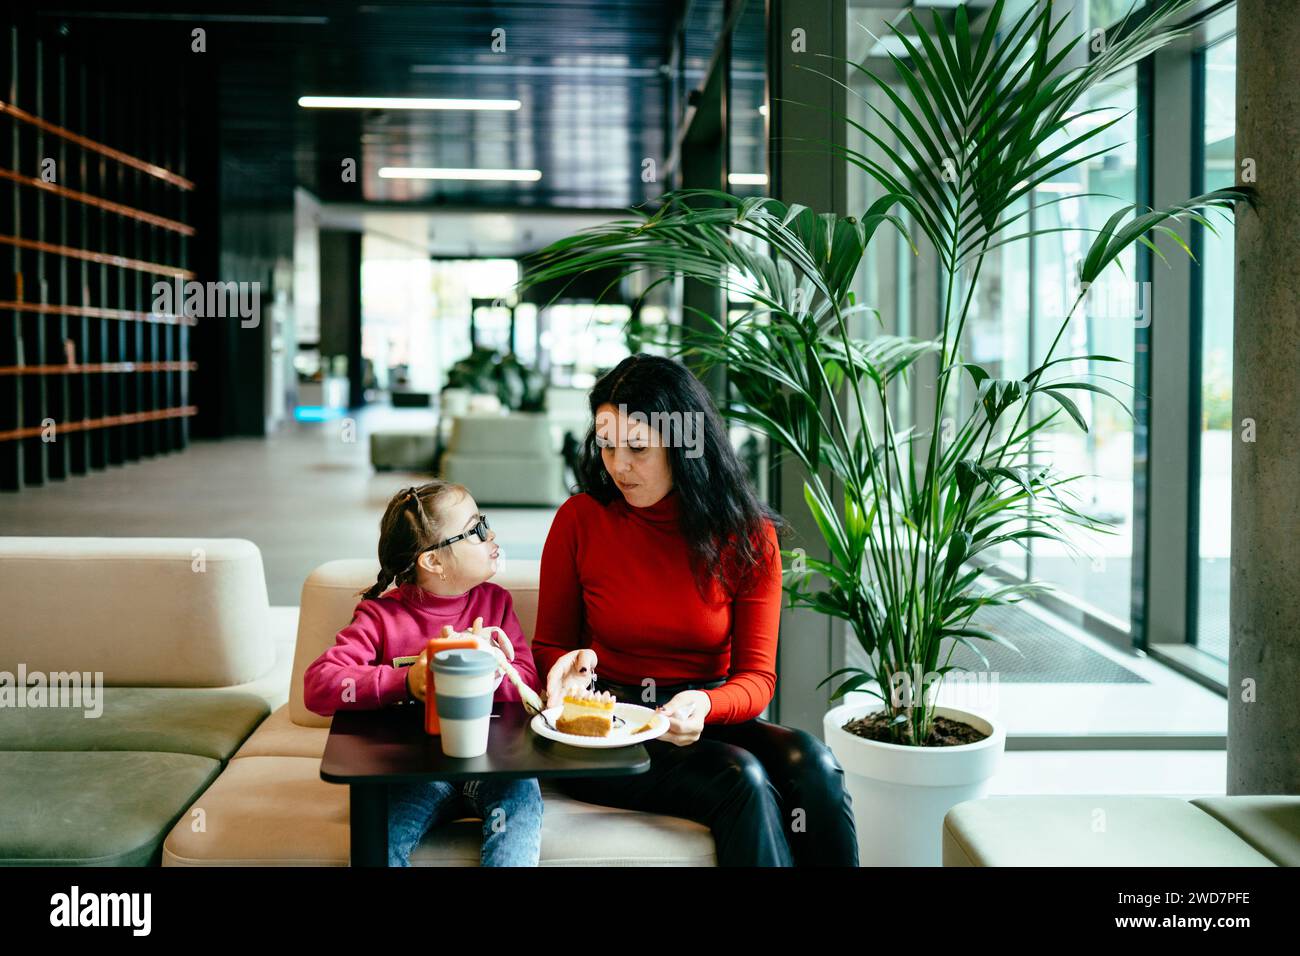 Portrait of loving mother and cute girl with down syndrome eating cake in cafe inside. Stock Photo